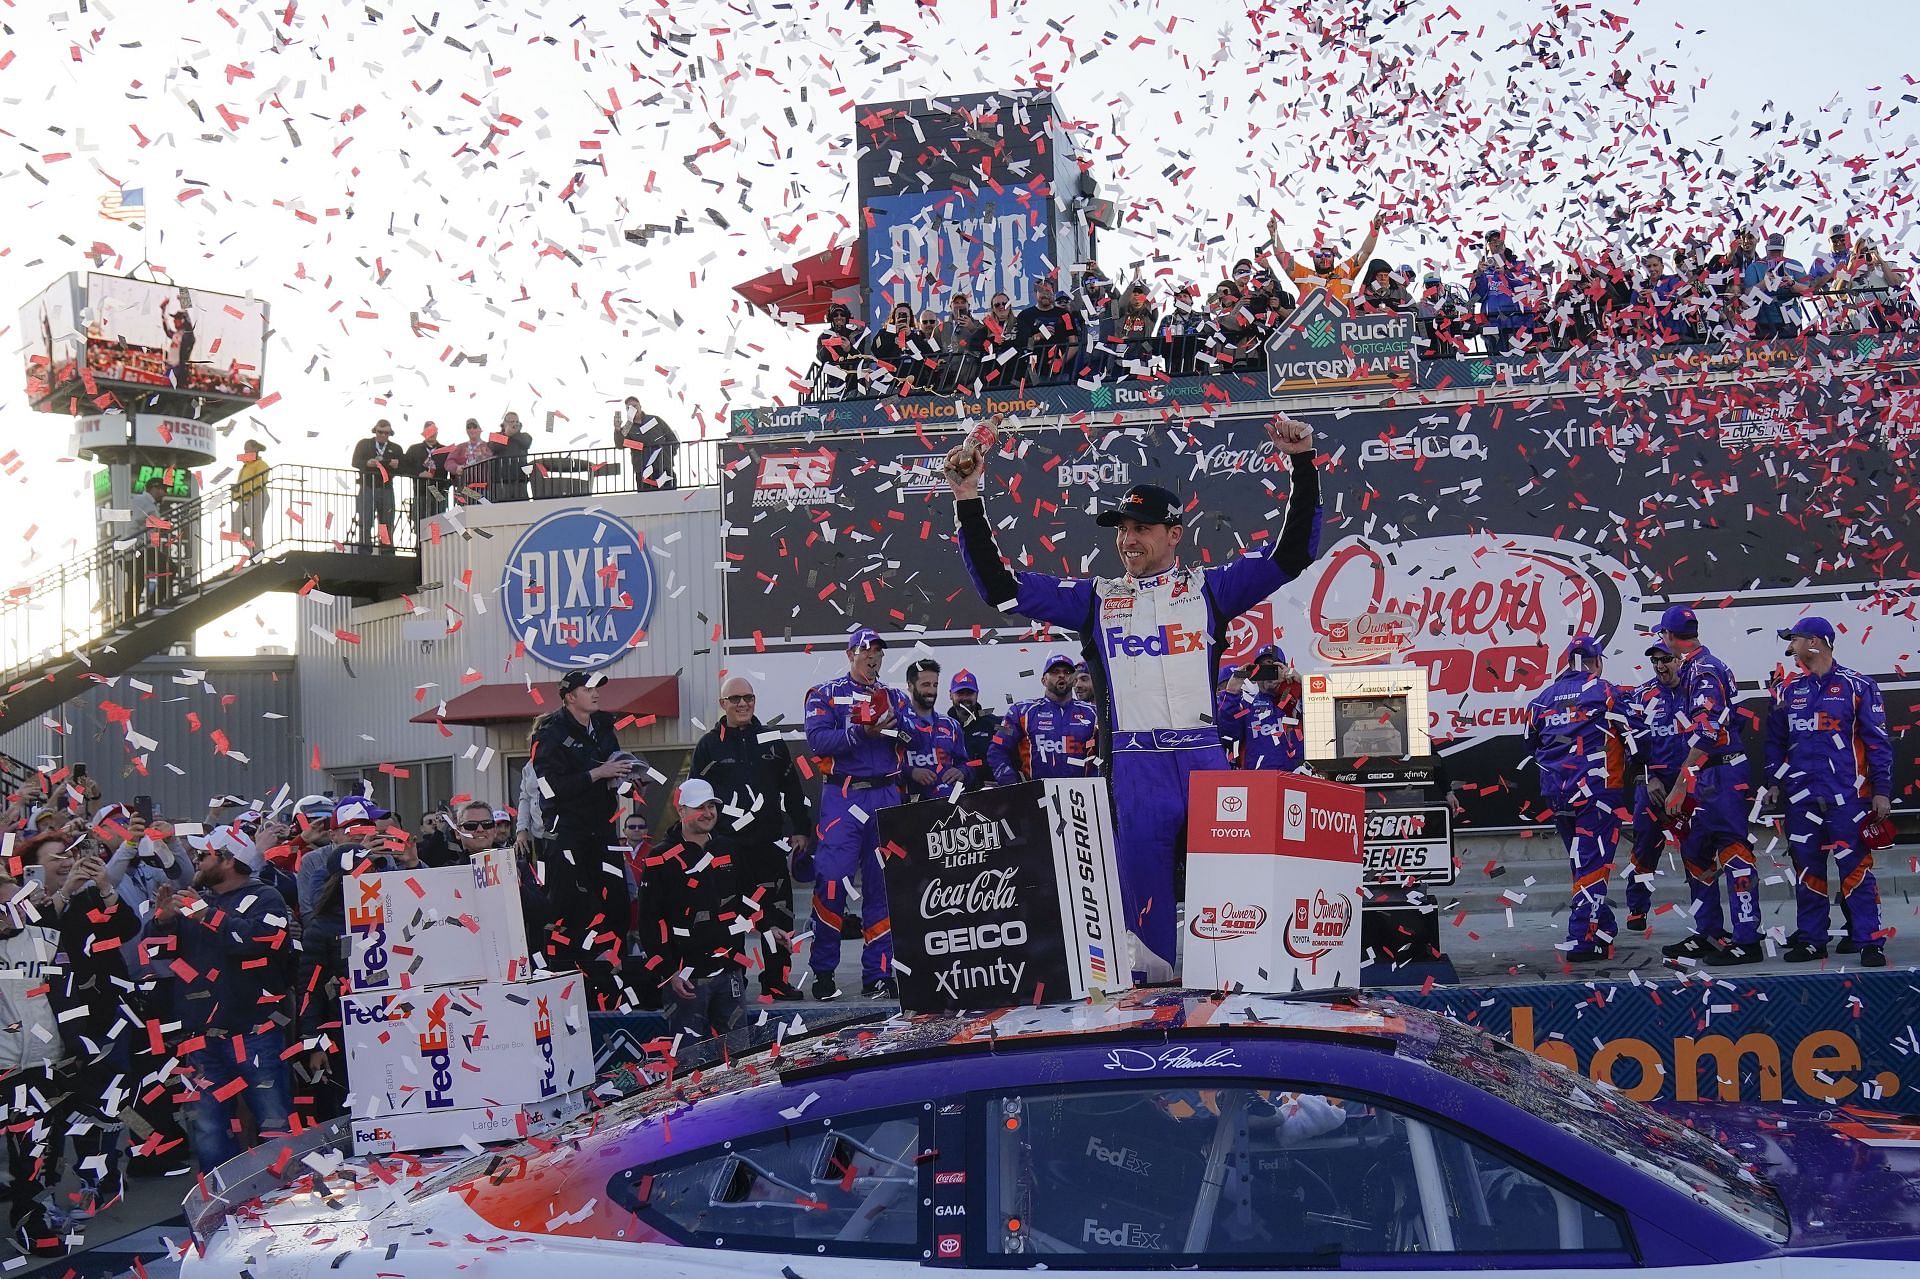 Denny Hamlin celebrates in the Ruoff Mortgage victory lane after winning the NASCAR Cup Series Toyota Owners 400 at Richmond Raceway (Photo by Jacob Kupferman/Getty Images)